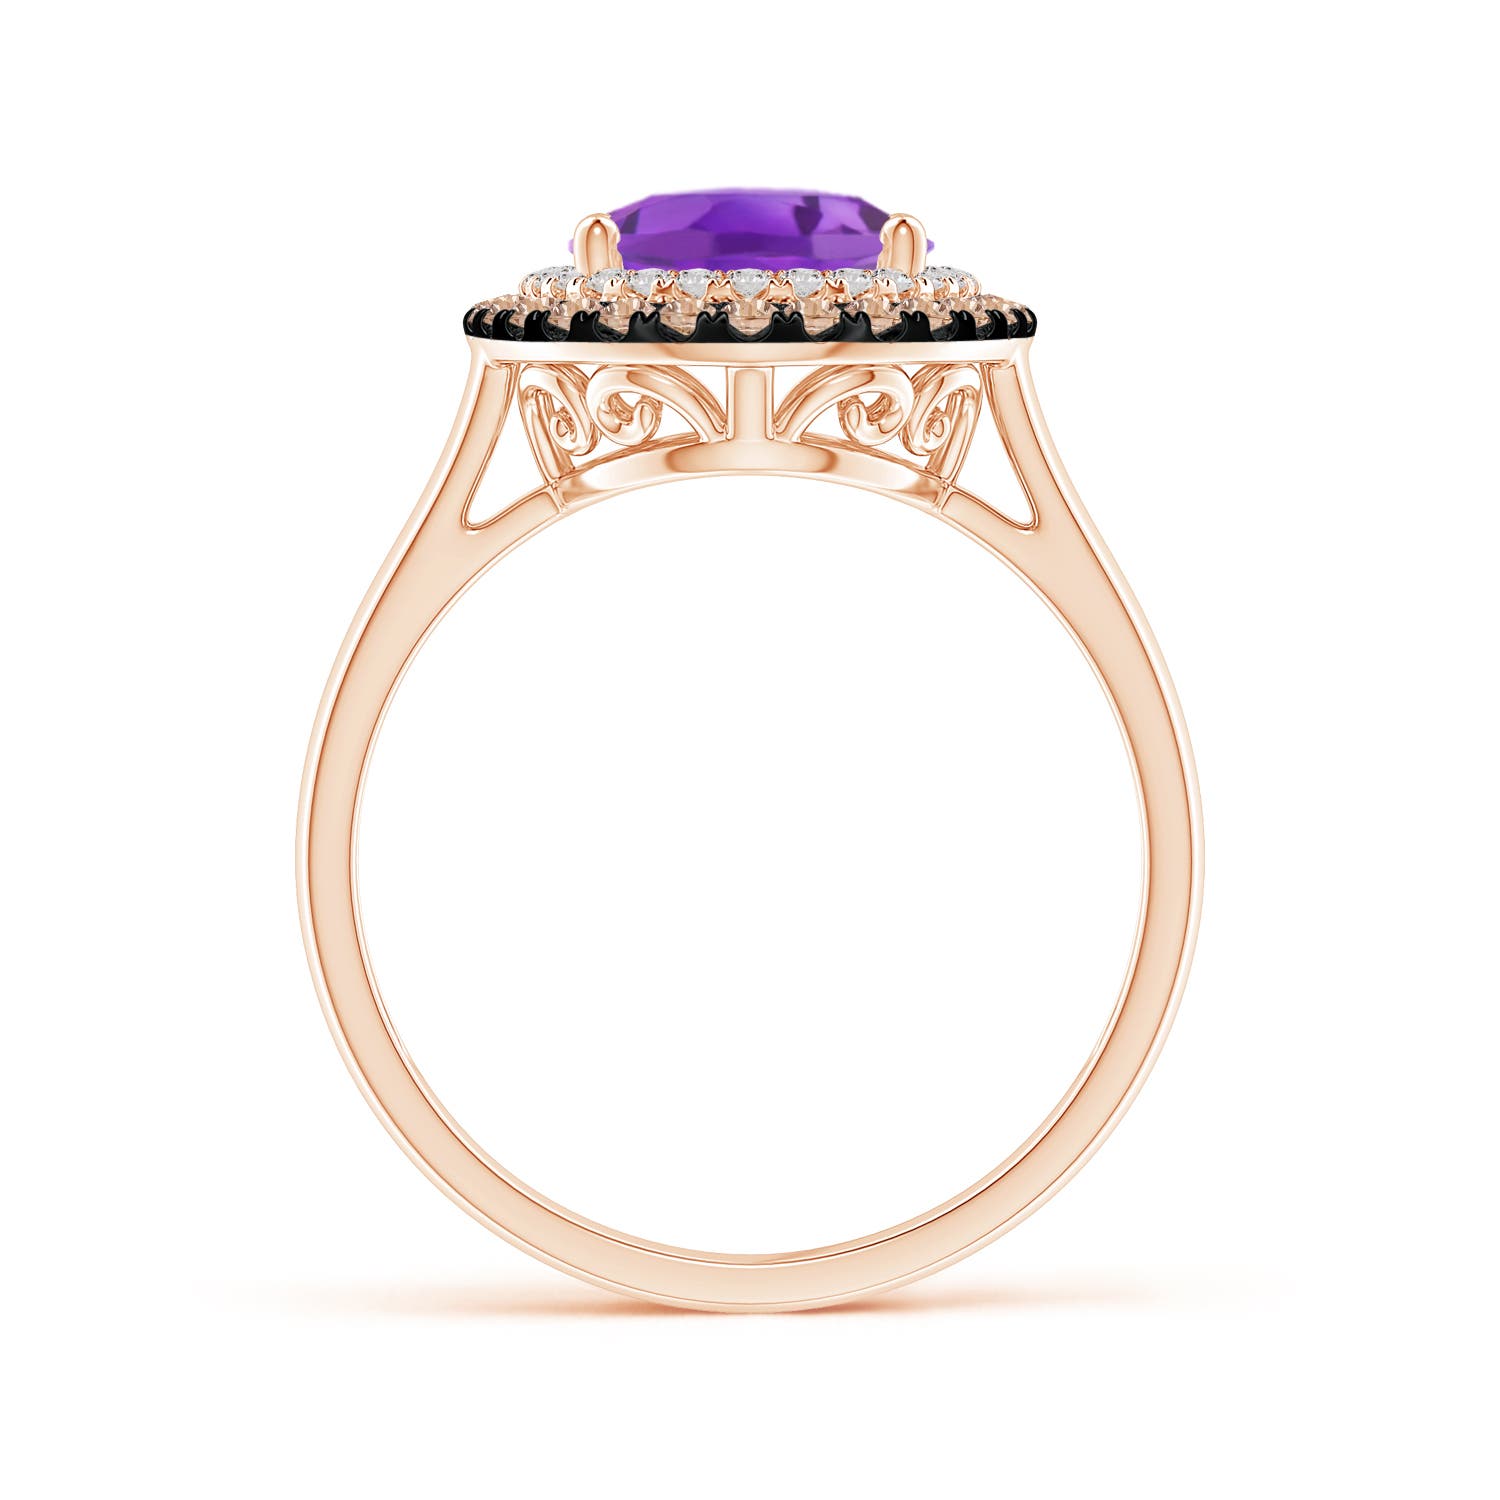 AA - Amethyst / 2.7 CT / 14 KT Rose Gold